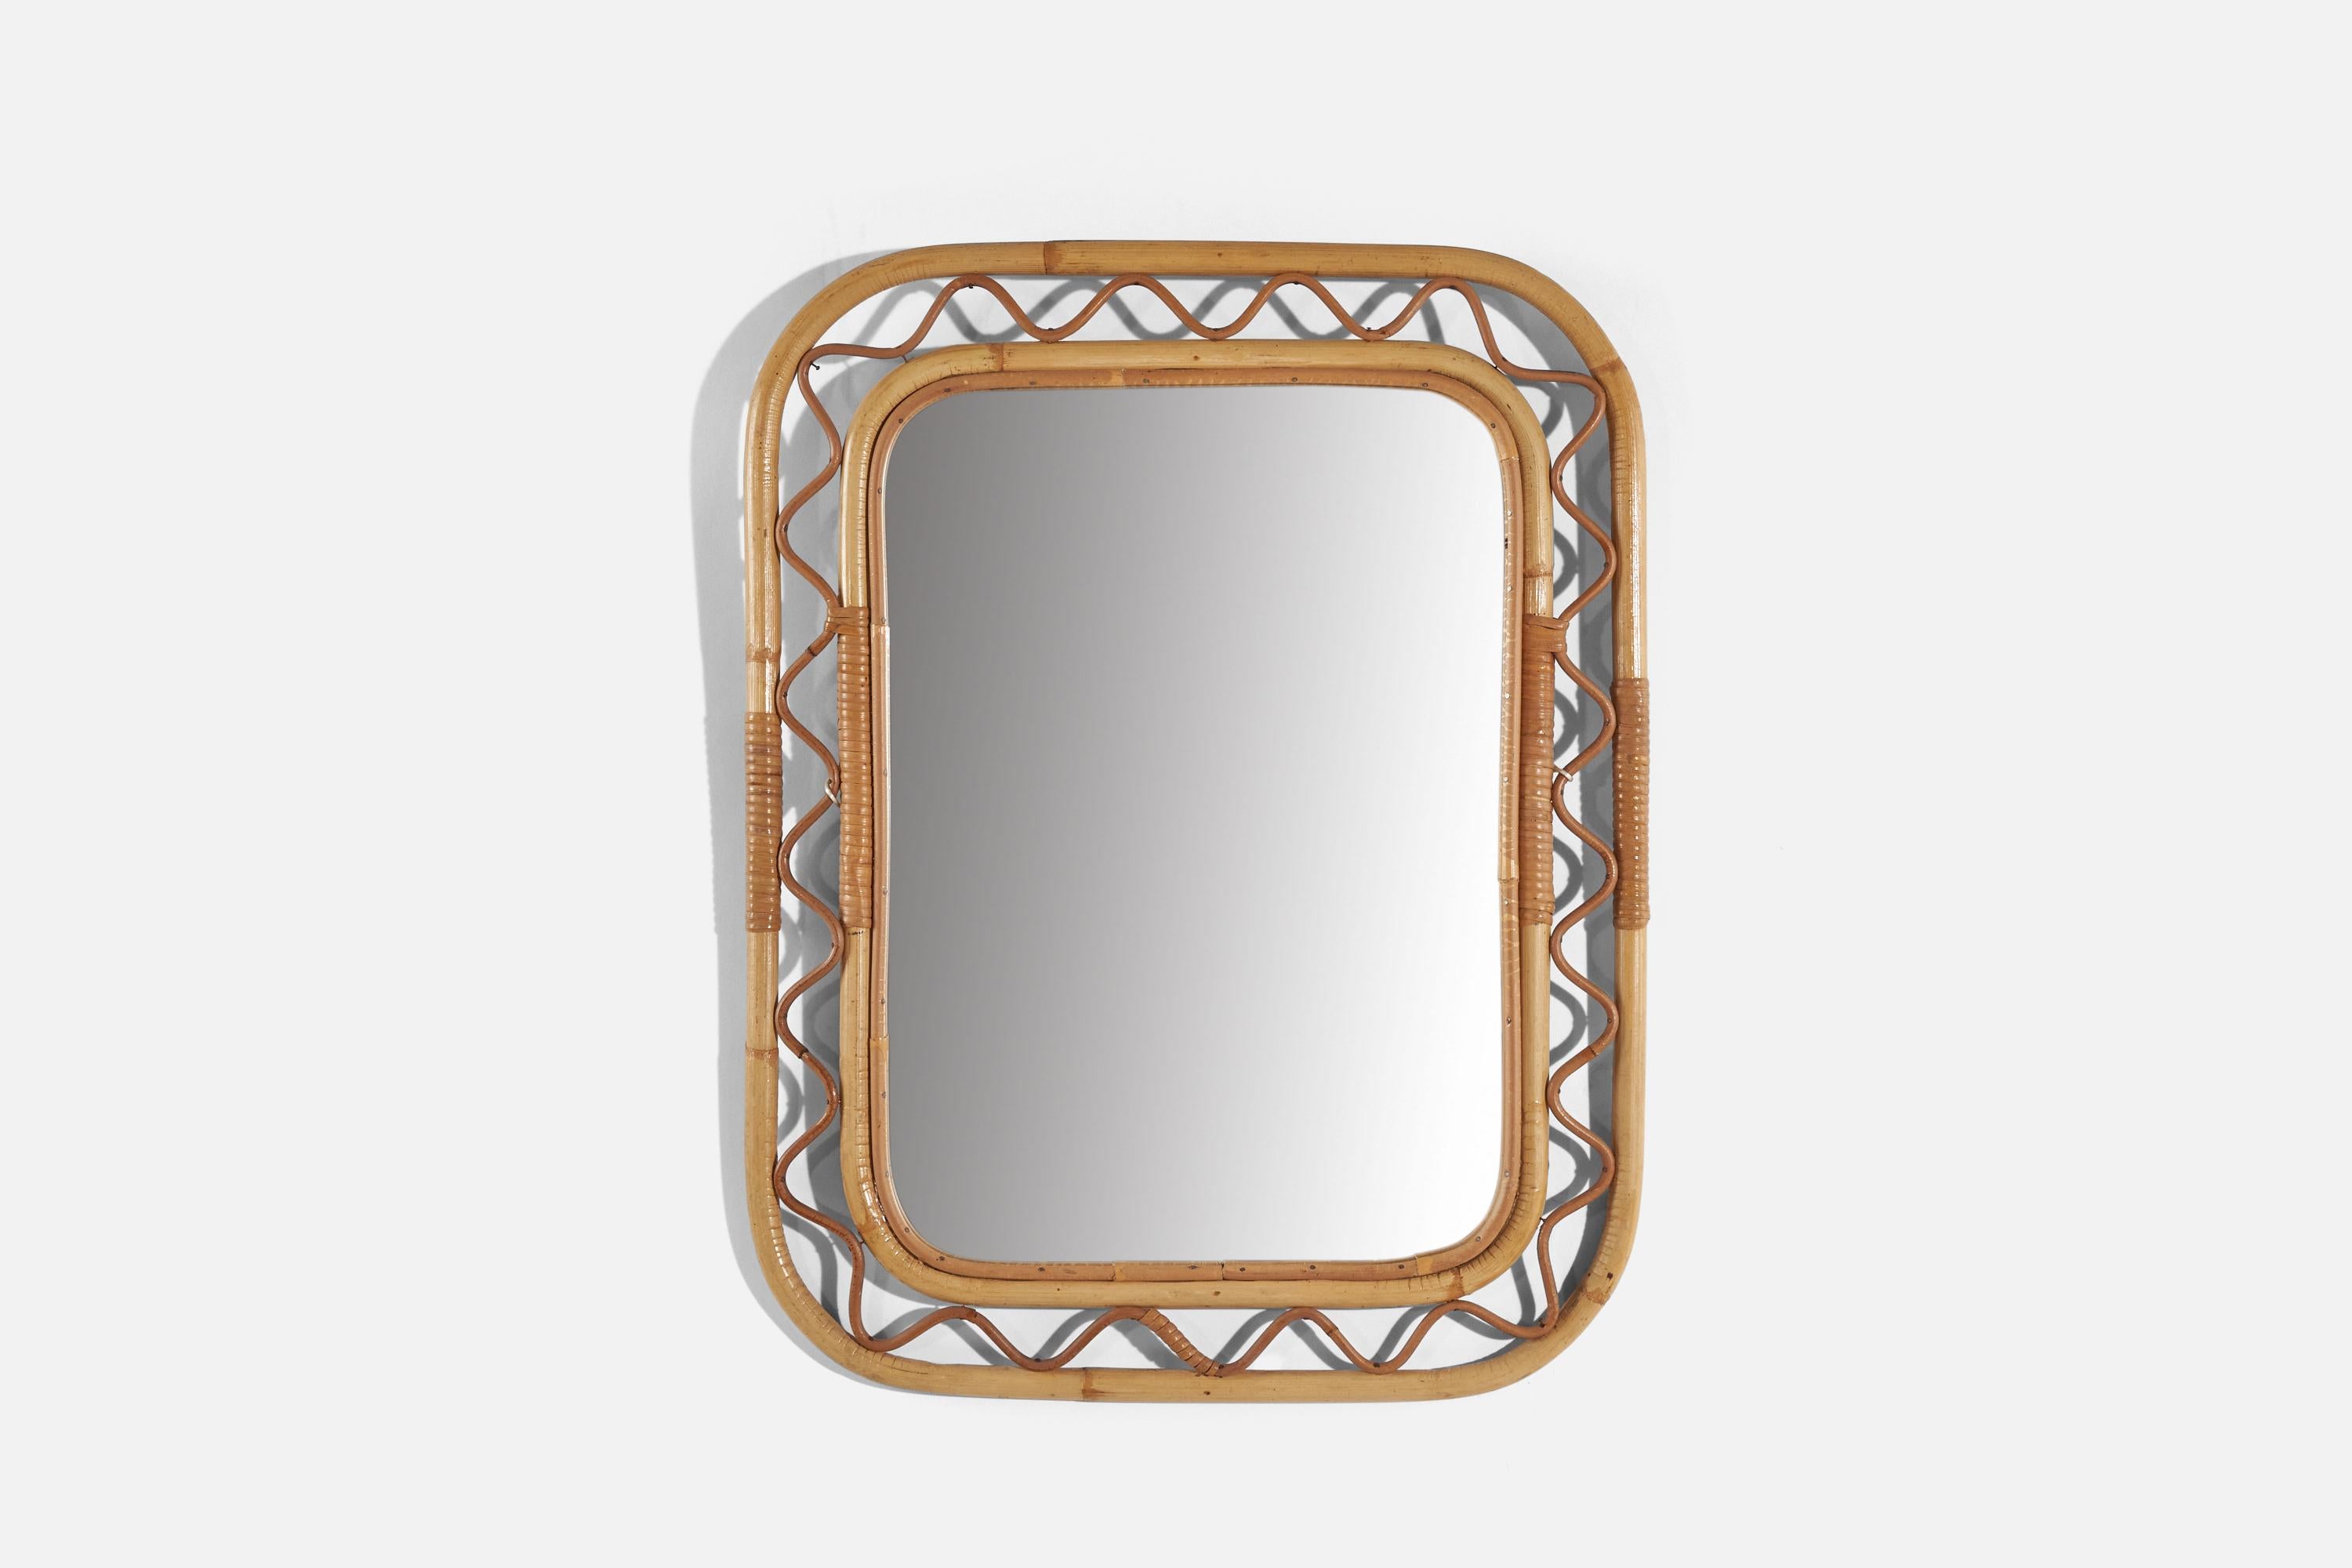 A bamboo and rattan wall mirror designed and produced in Sweden, c. 1950s-1960s. 

